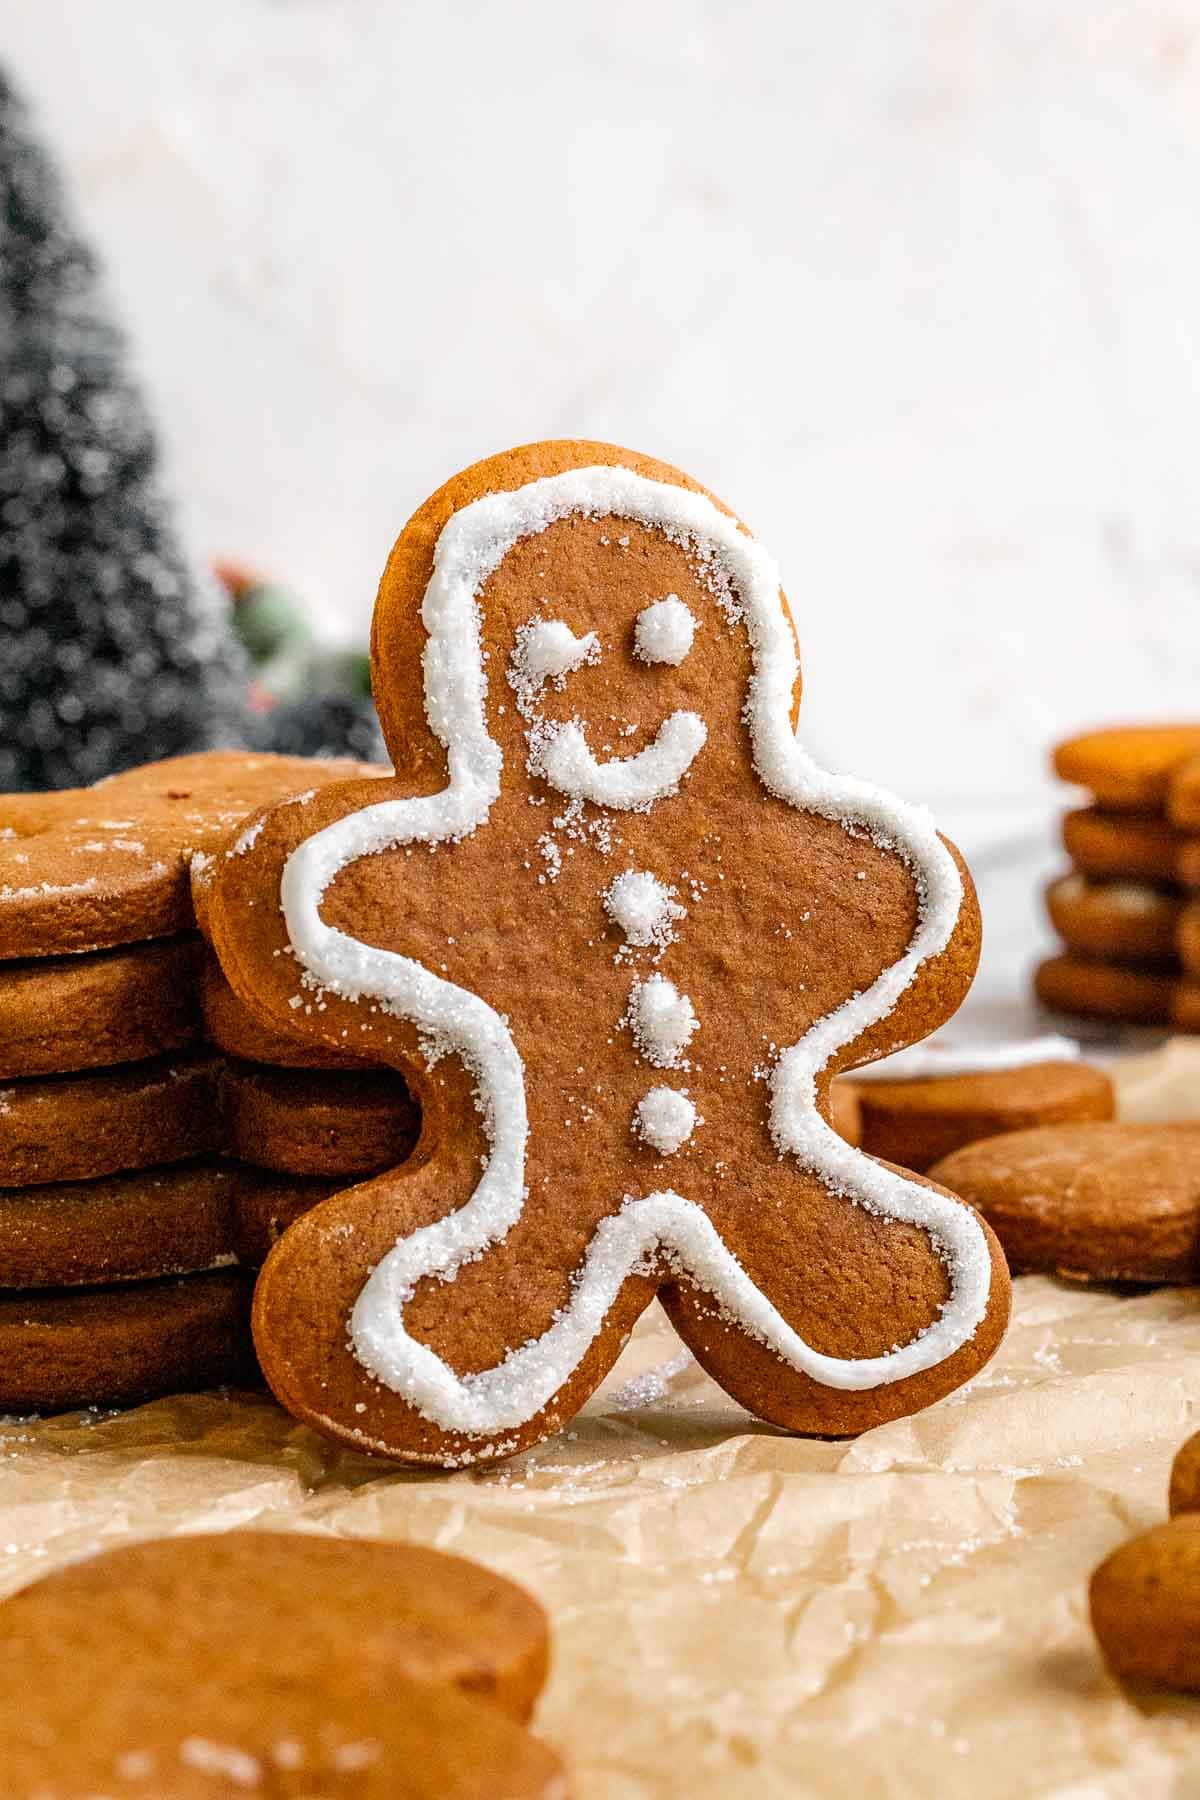 Chocolate Gingerbread Men propped up against stack